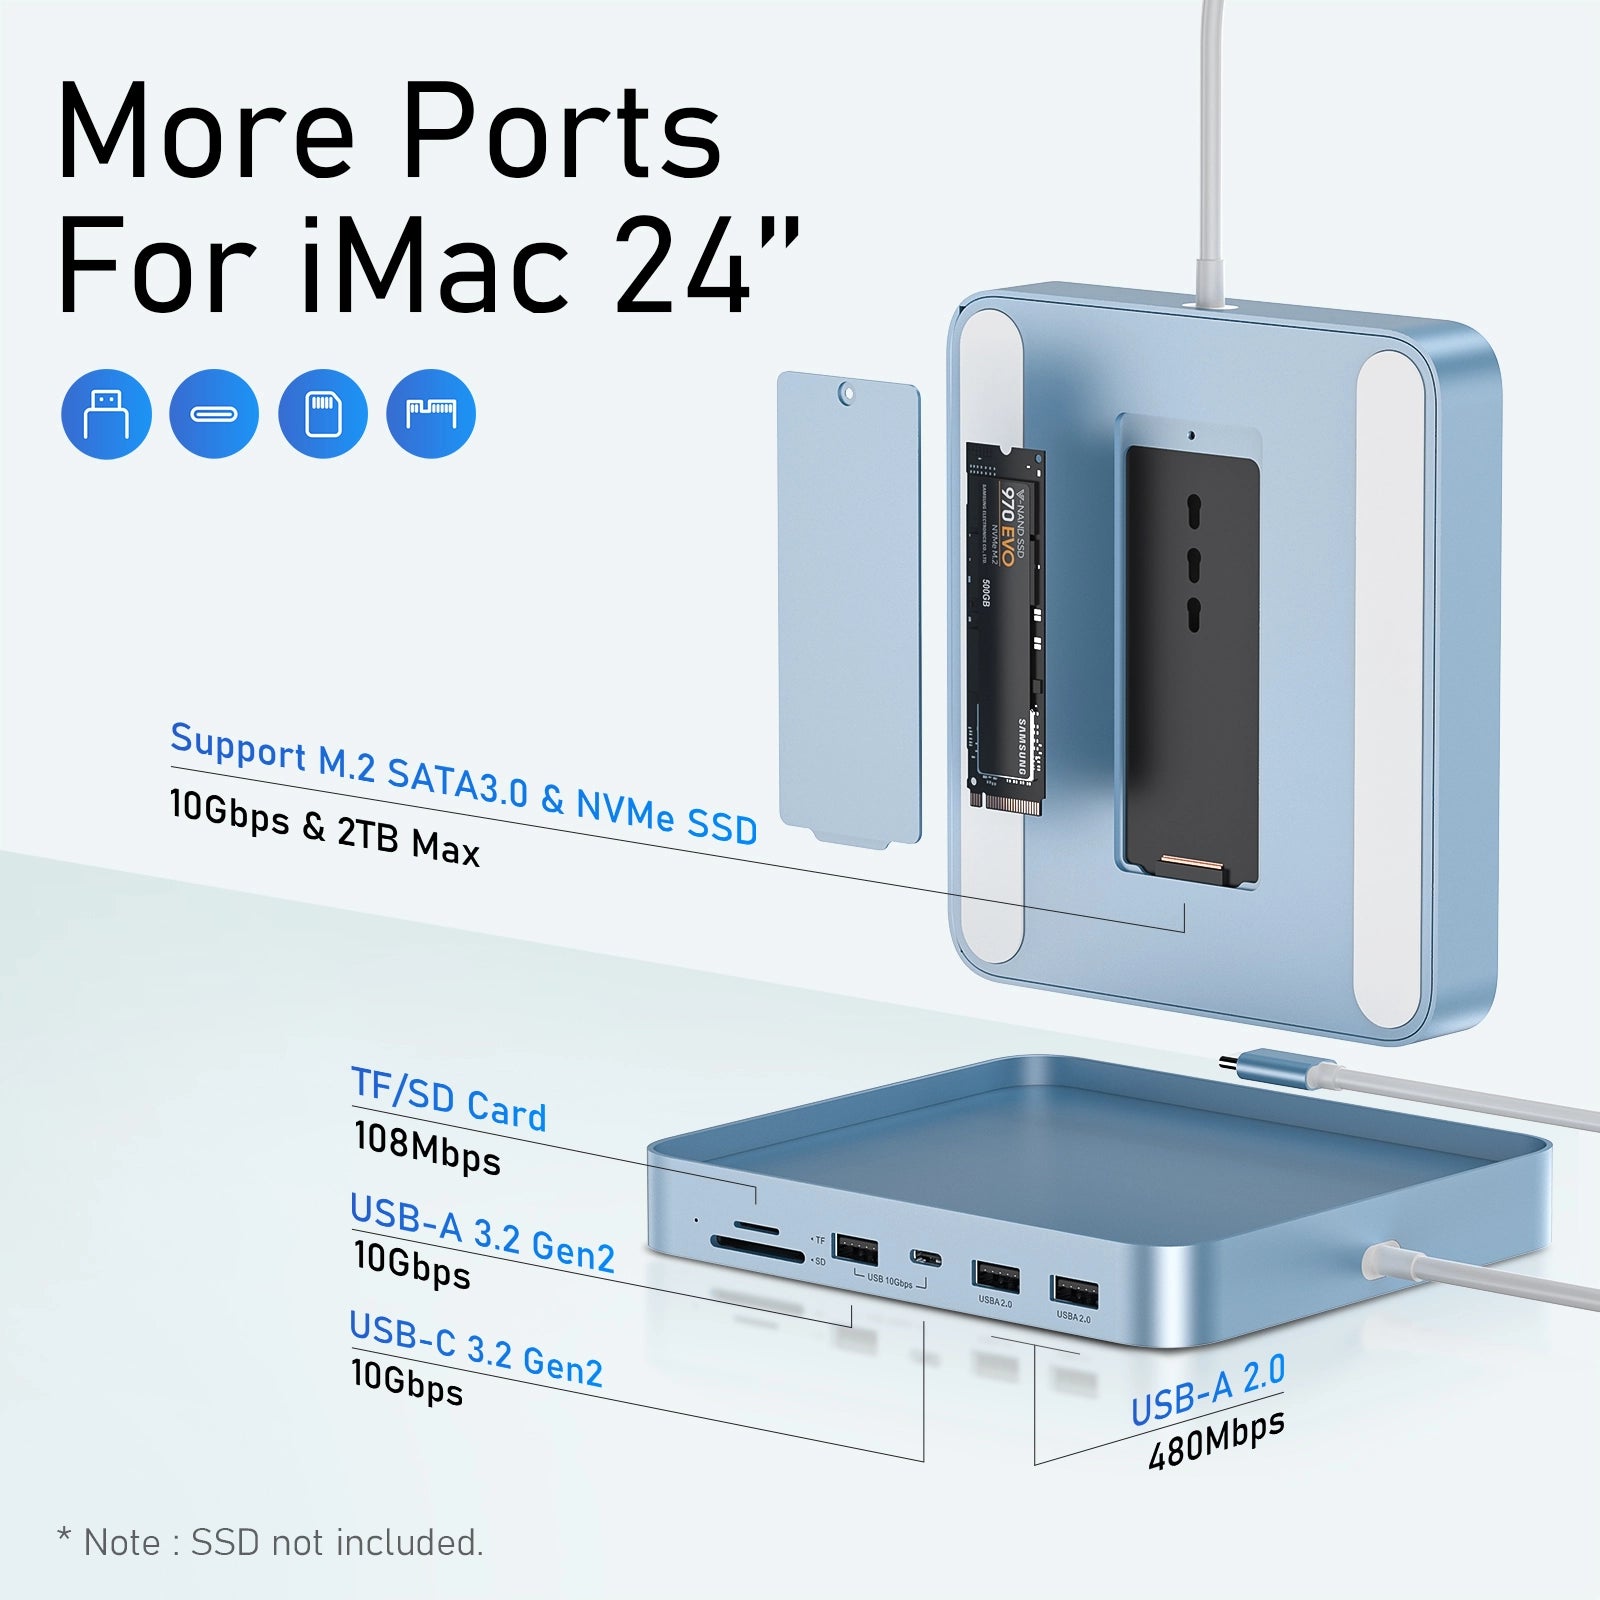 PULWTOP 7-in-1 USB C HUB for iMac 24-inch 2021, USB Hub Adapter iMac Accessory, Docking Station Supports Expansion M.2 NVMe SSD (Not Included)-Blue